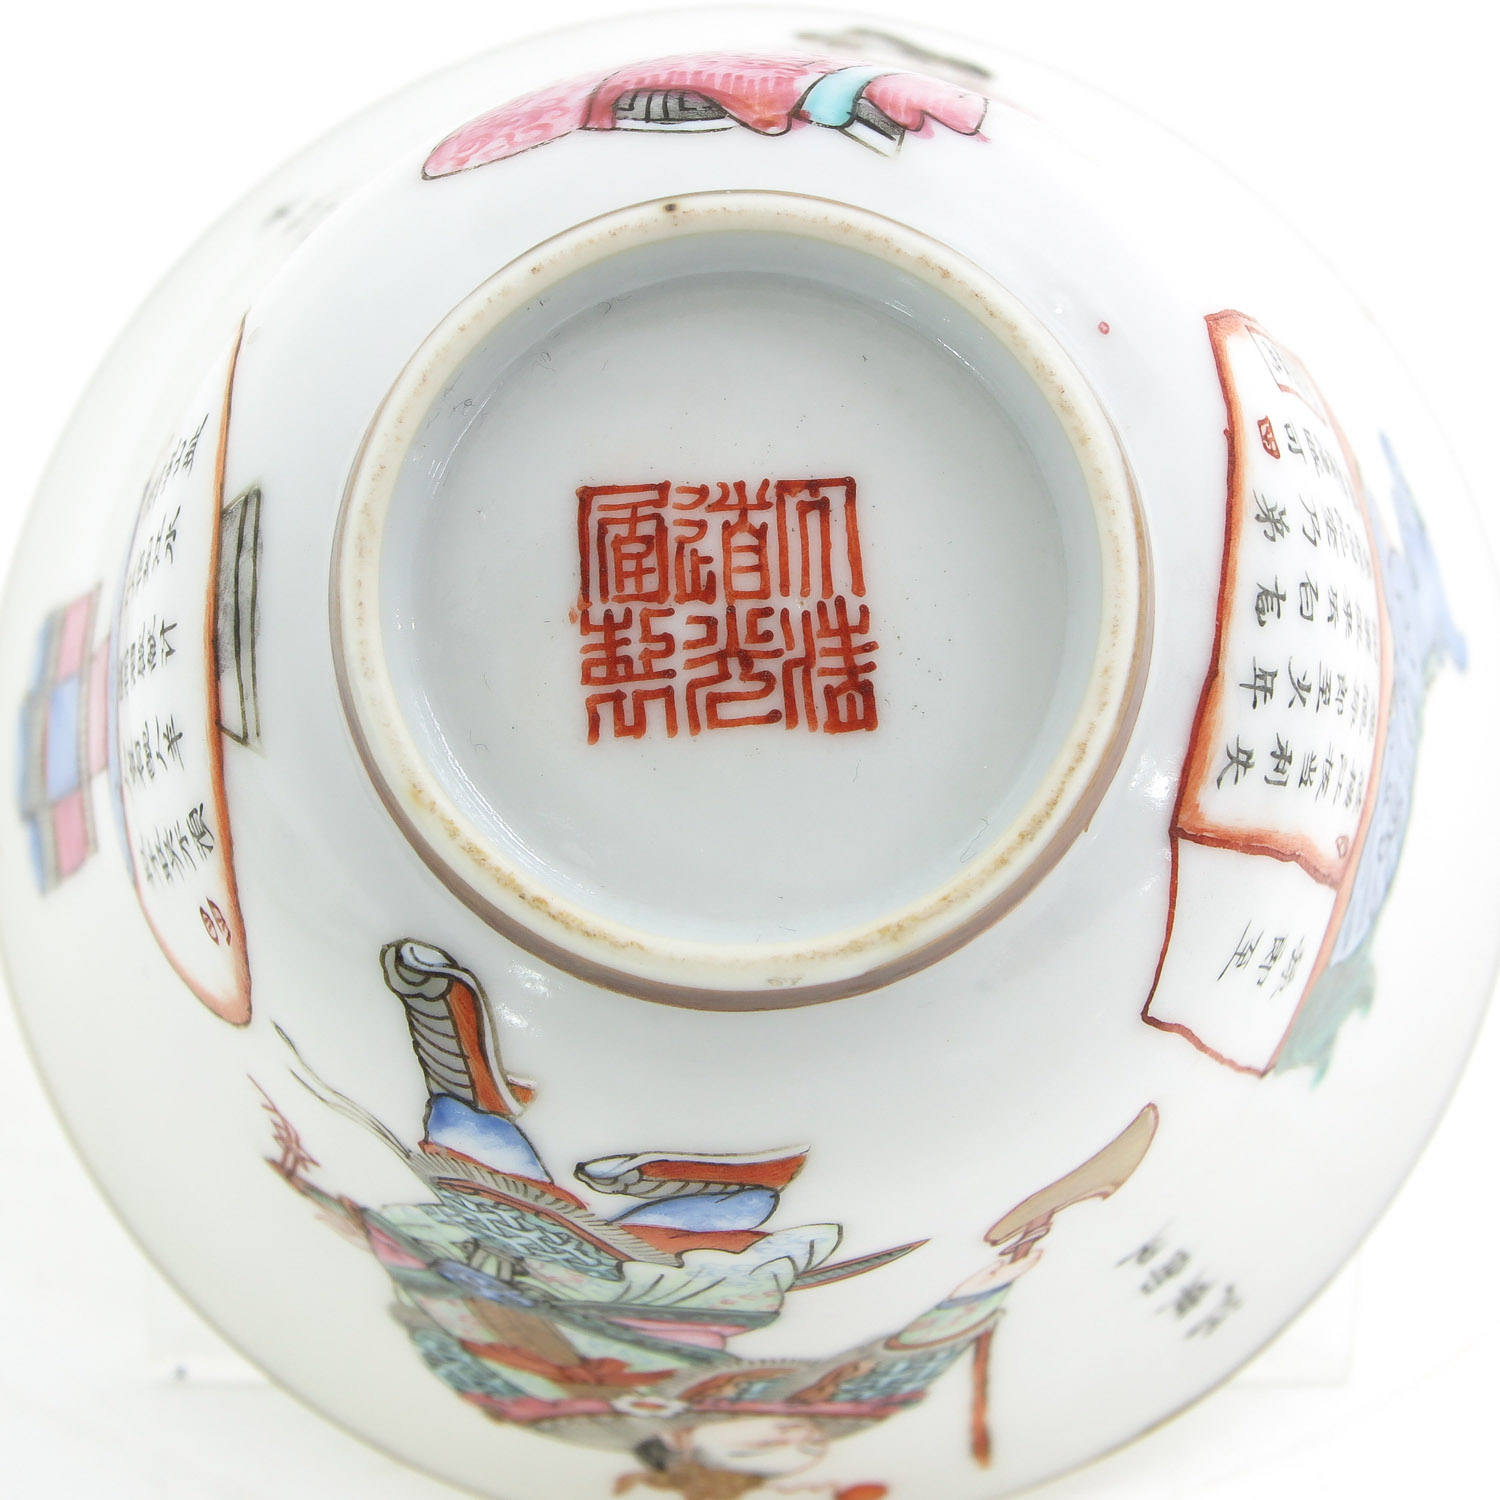 A Wu Shuang Pu Decor Cup and Saucer - Image 7 of 10